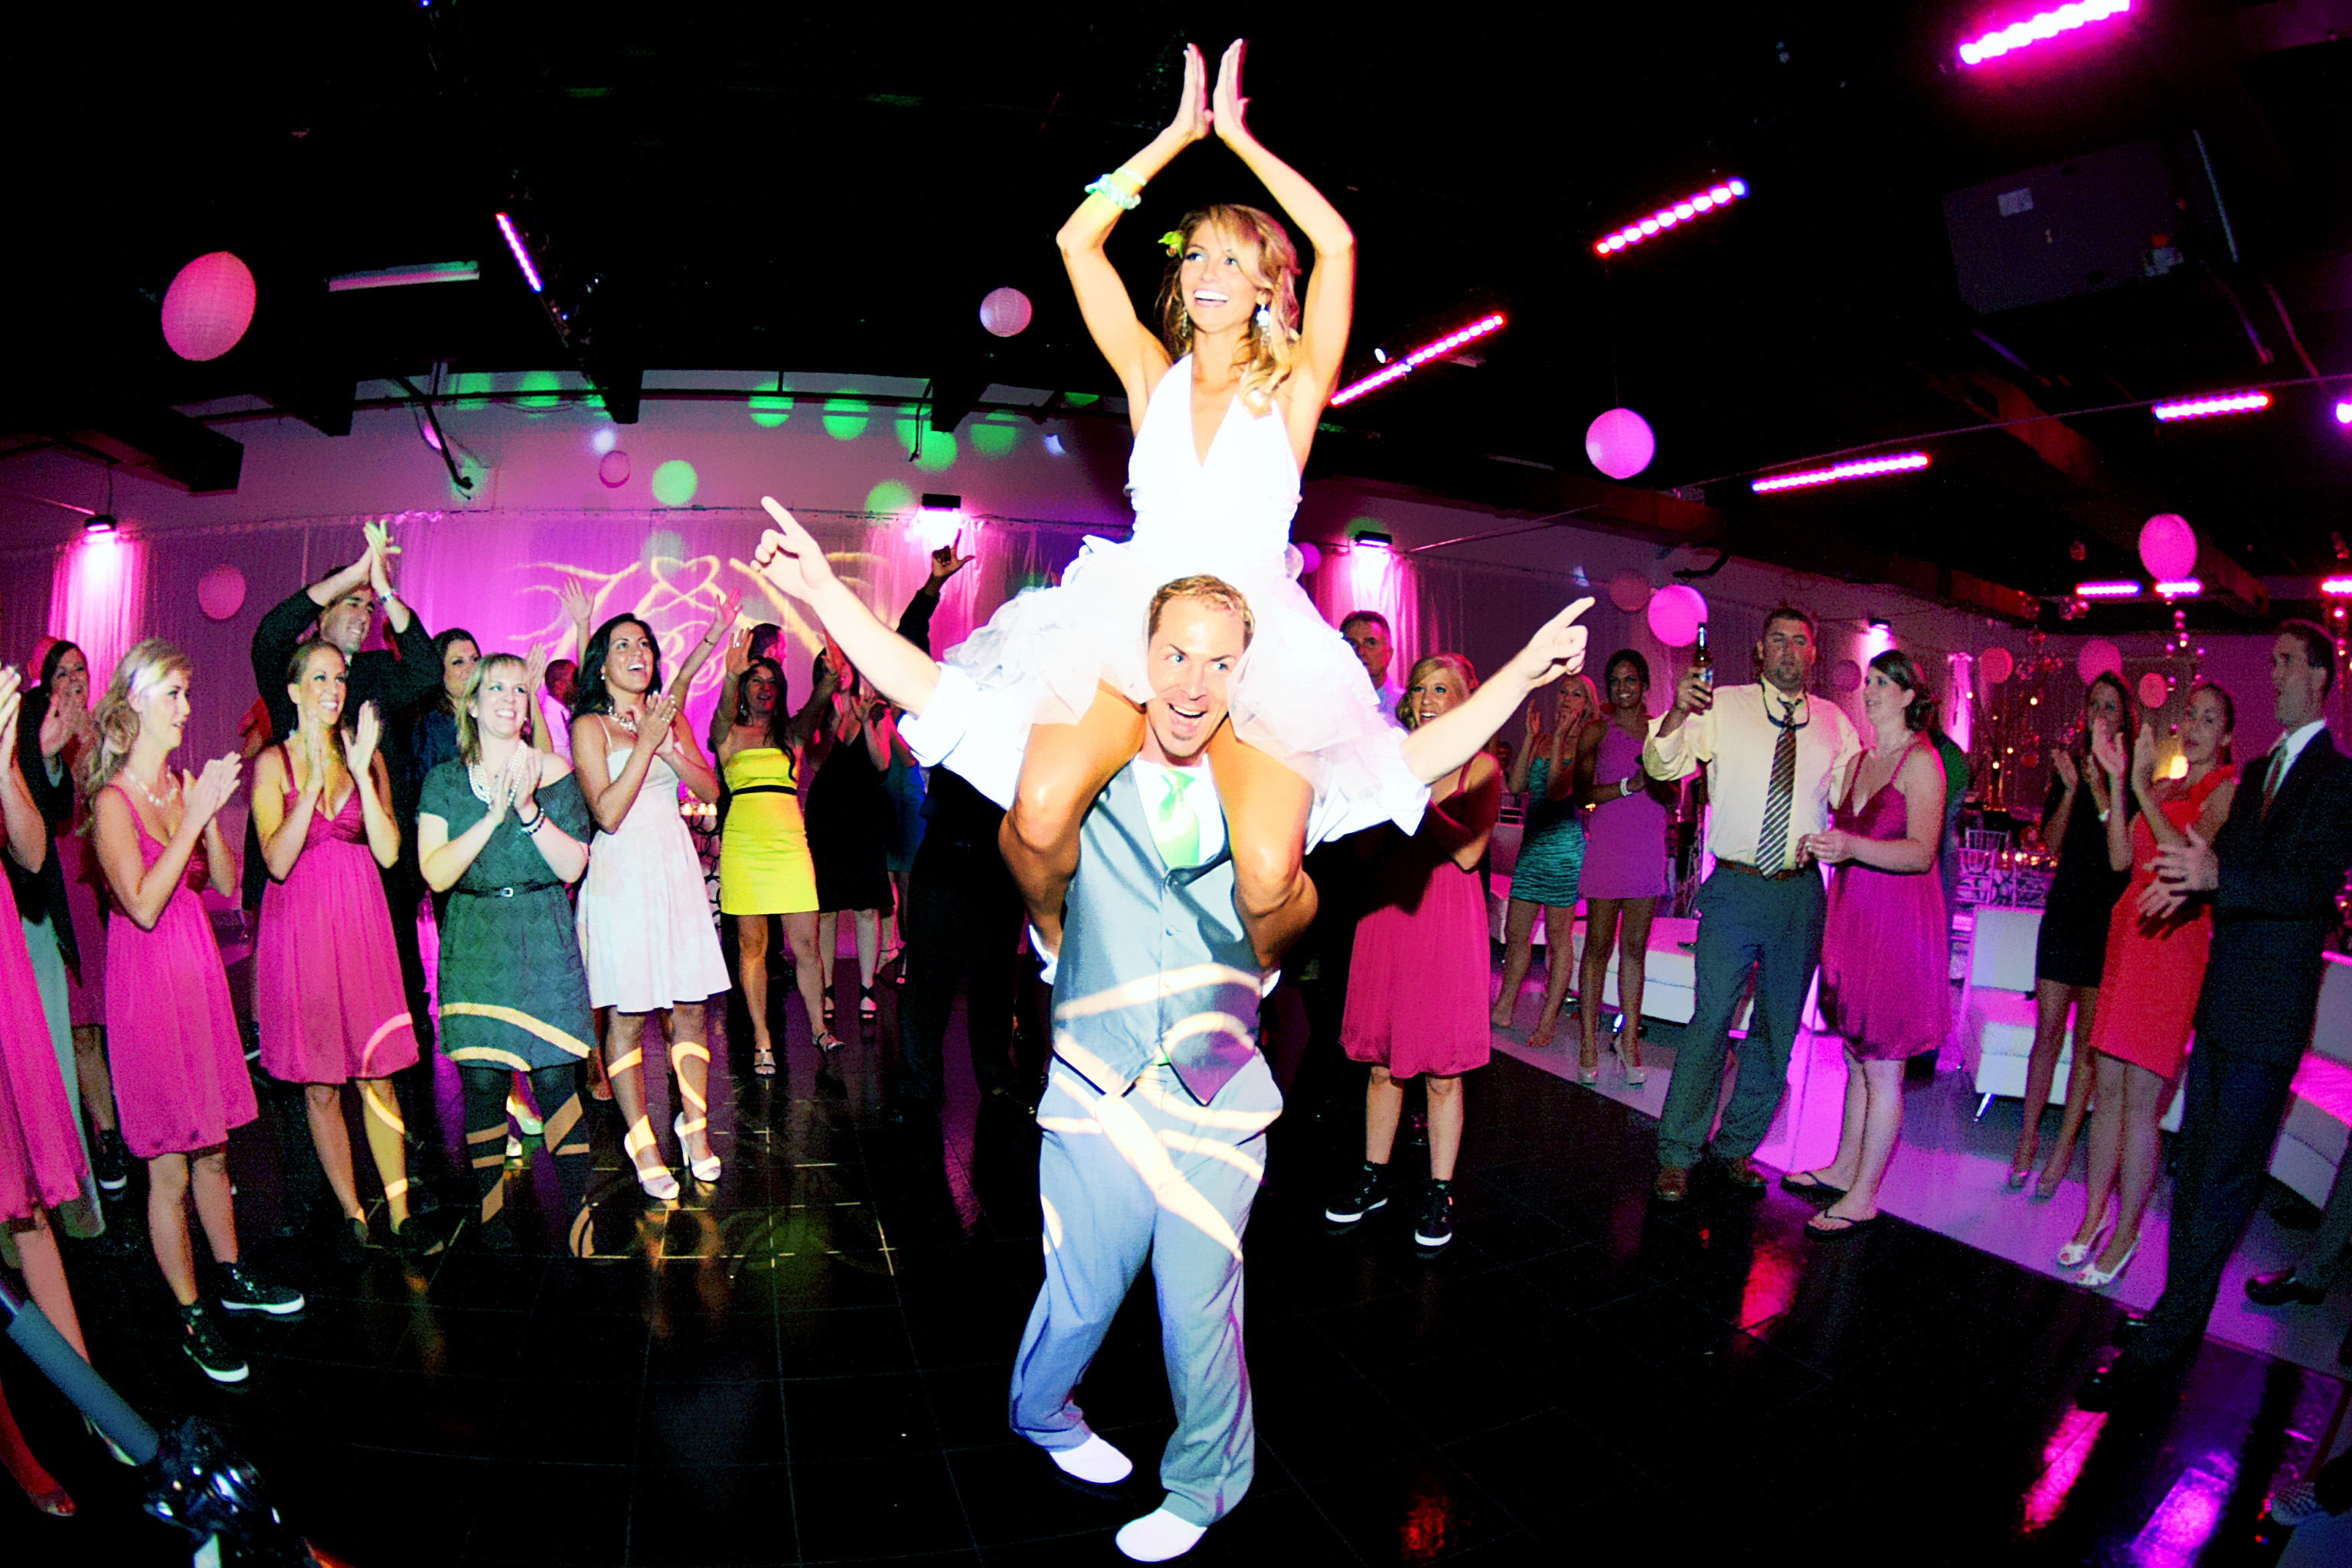 Engagement Party Entertainment Ideas
 How to Plan the Perfect Wedding Party Wedding Advice